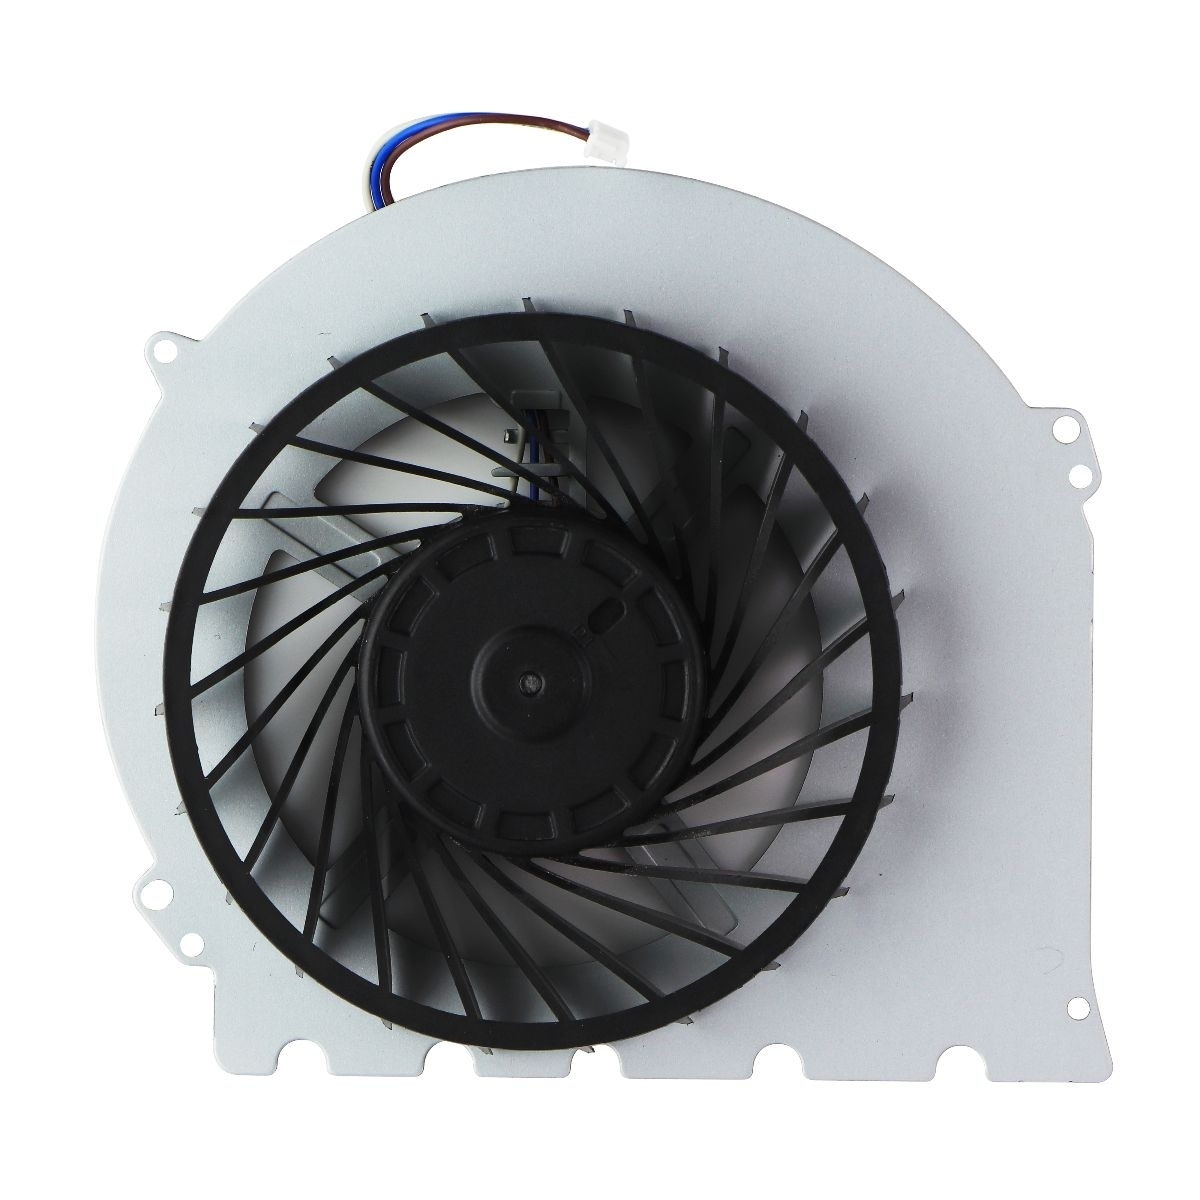 Delta OEM Replacement Fan For Sony PS4 Slim (KSB0912HD) 1.3A 12V